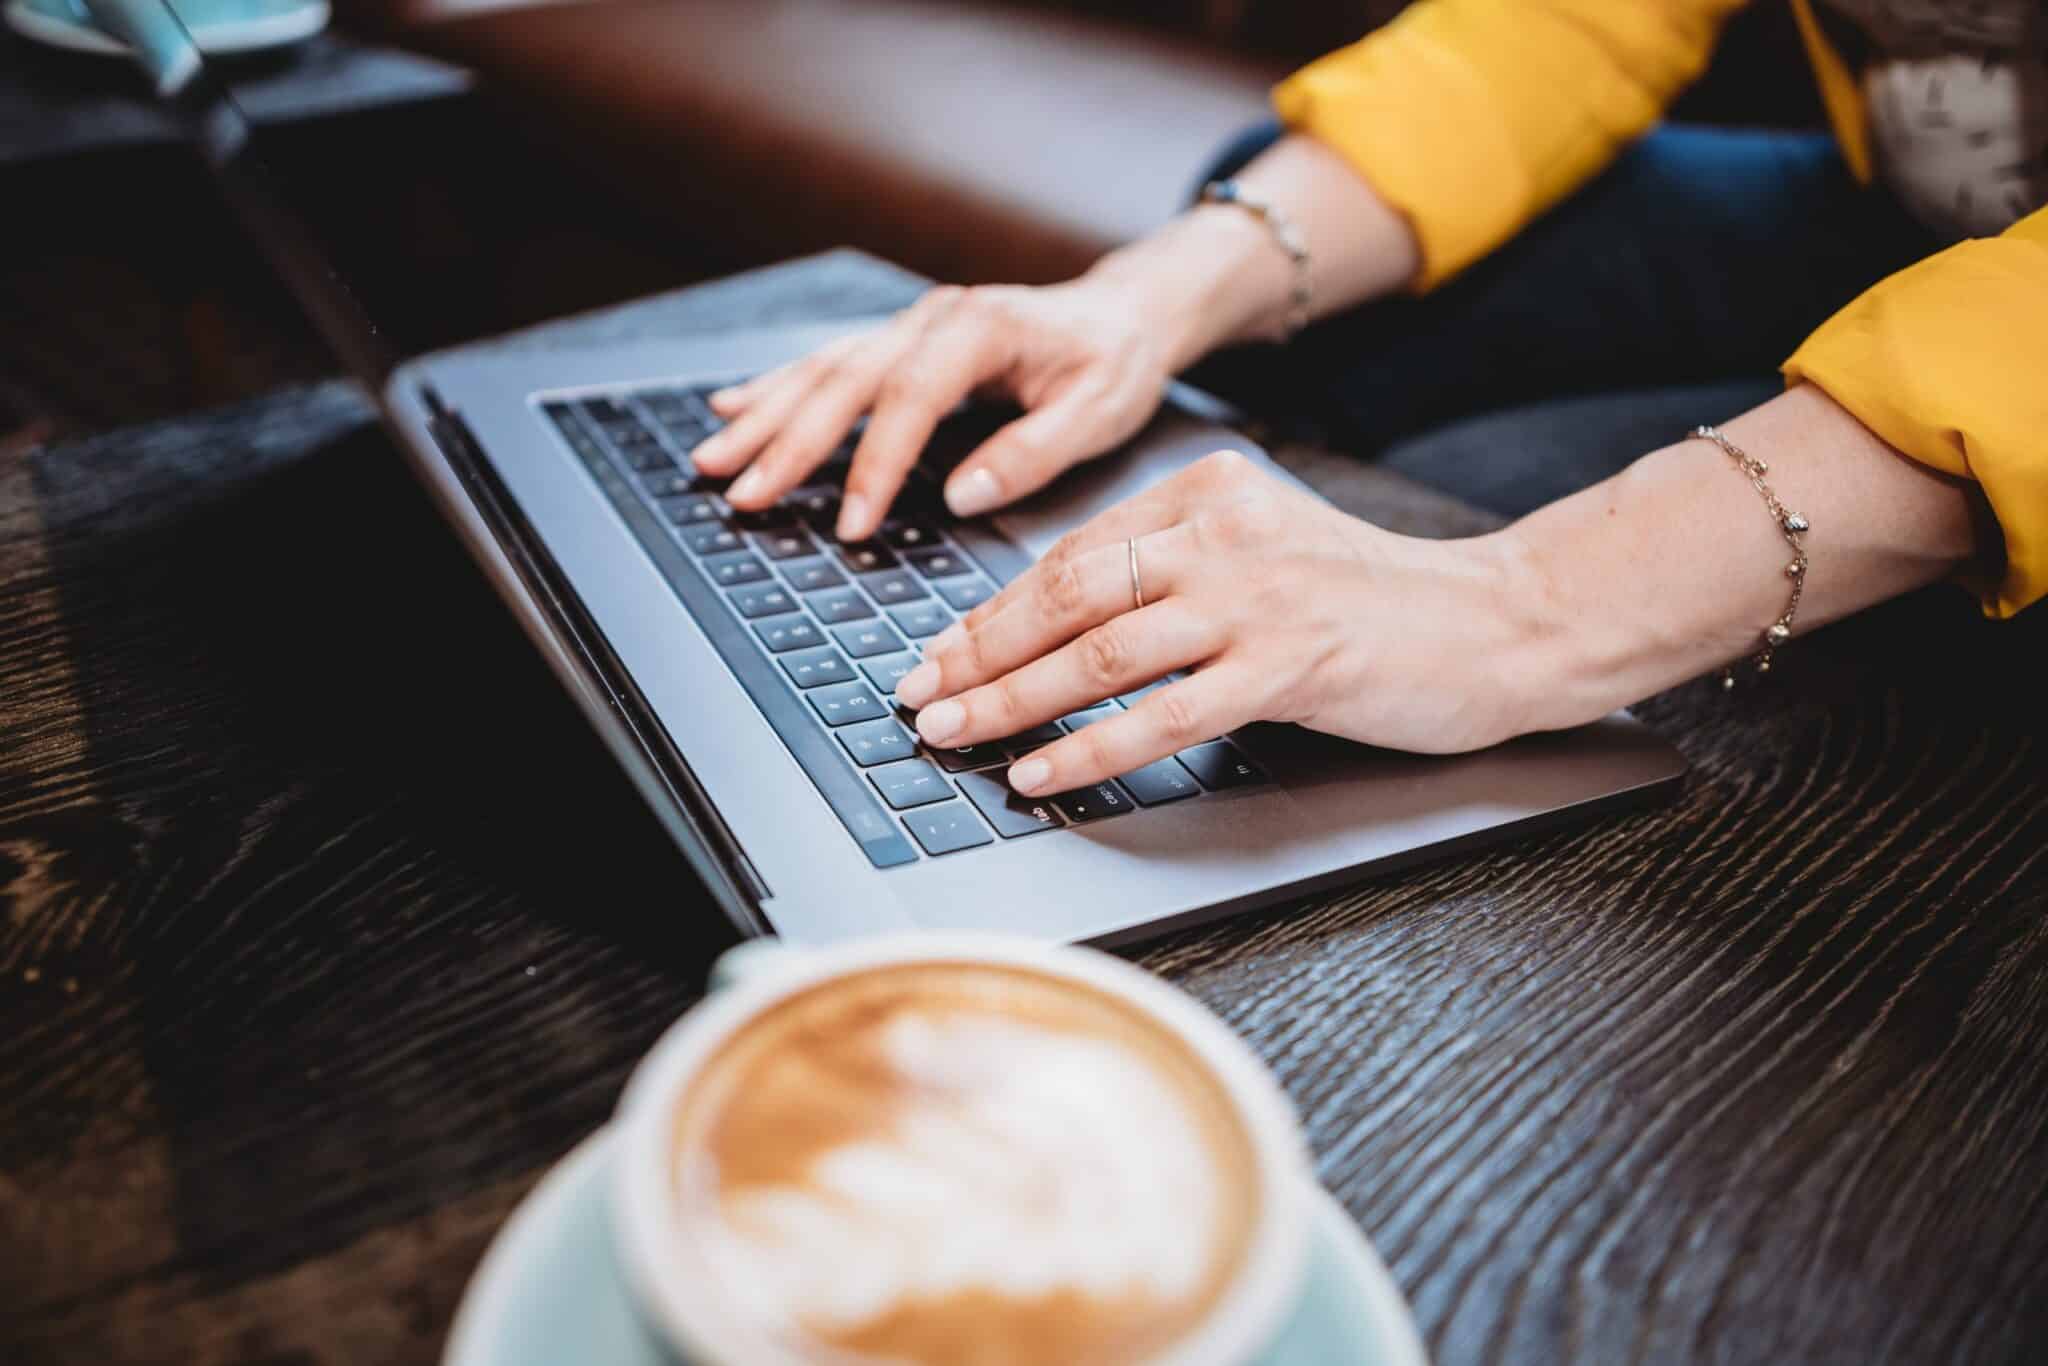 a persons hands typing on a laptop with a cup of coffee beside the laptop